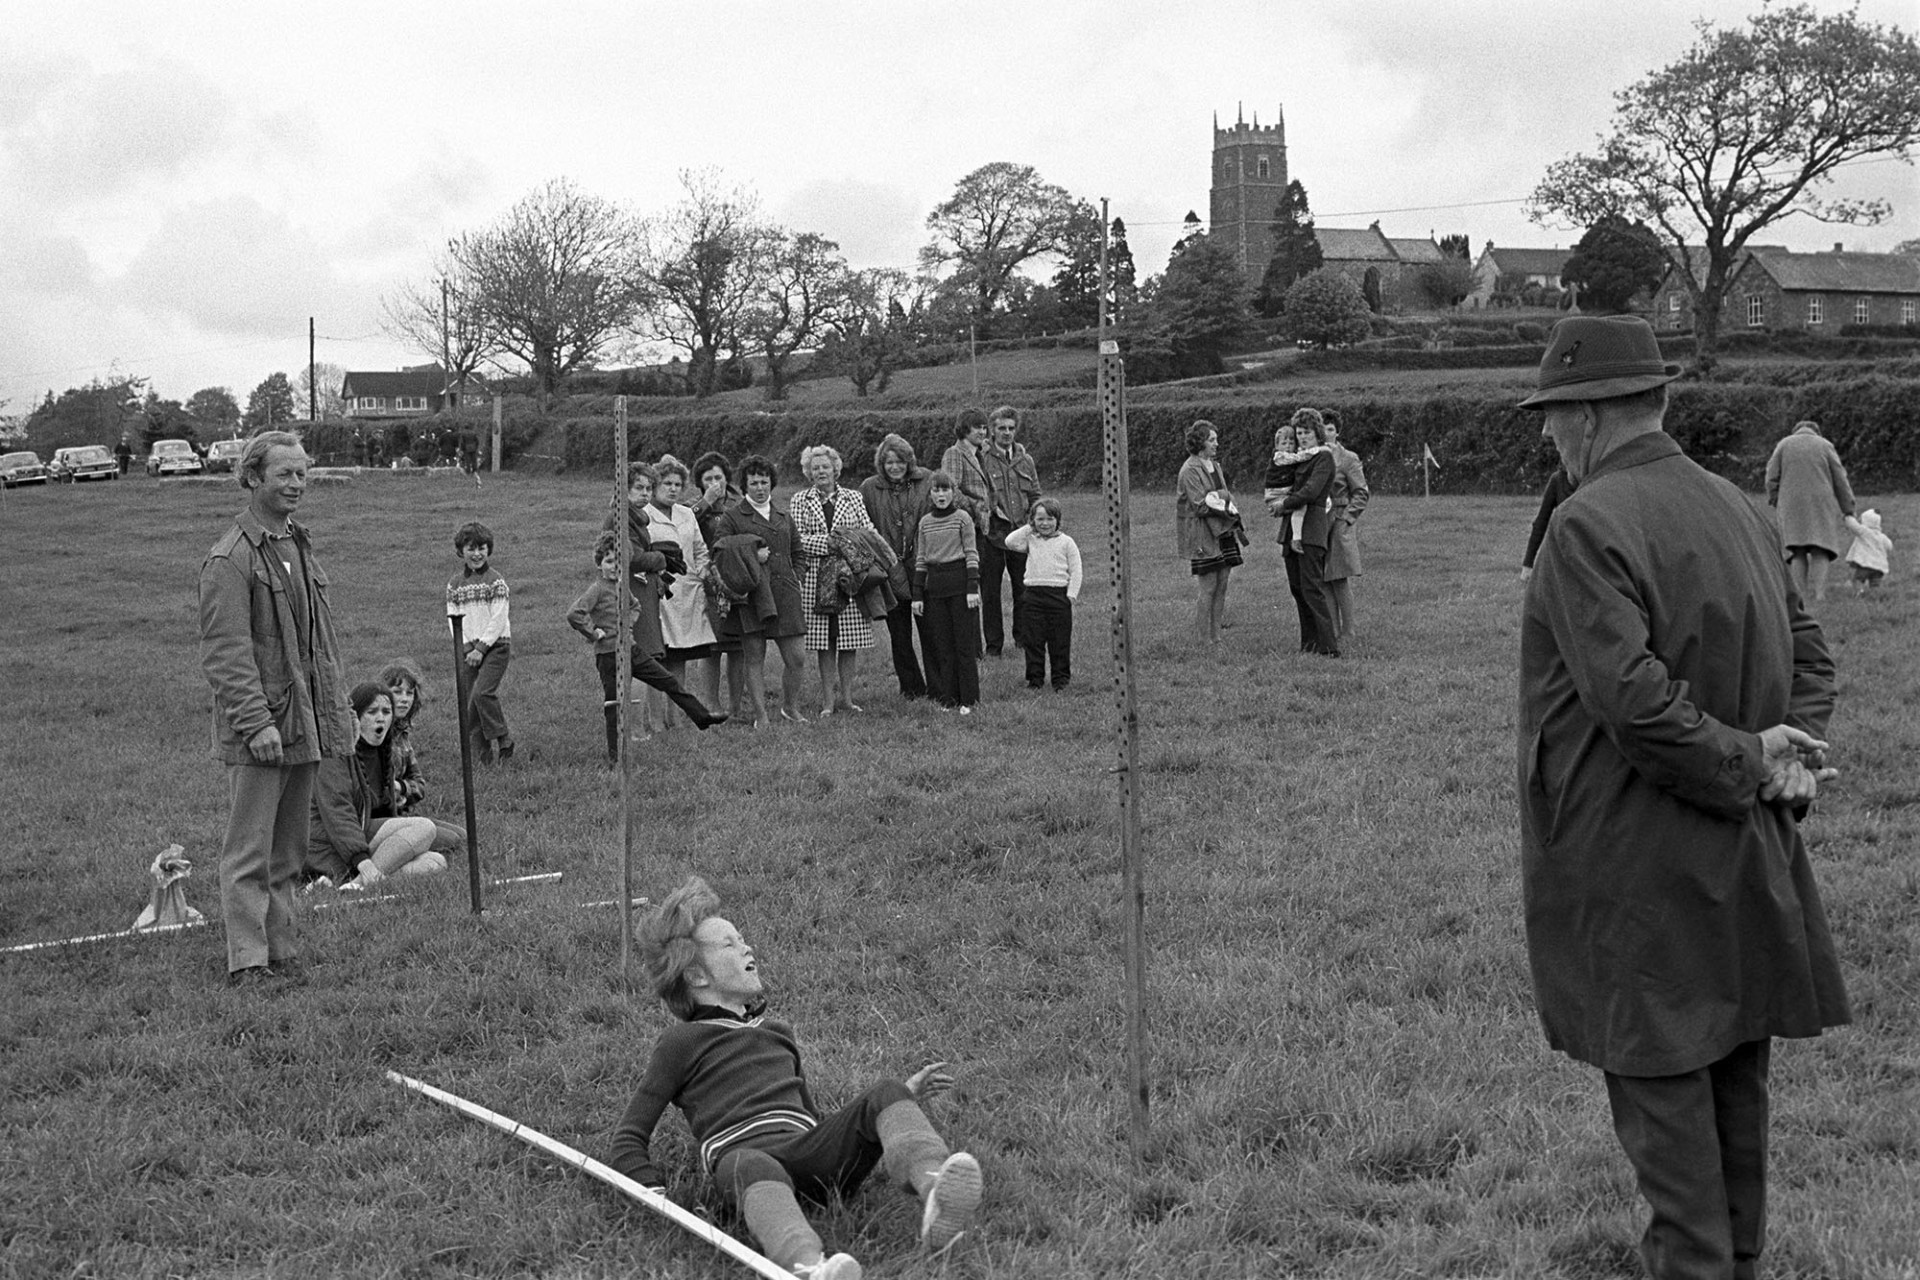 Sports at Club Day, High jump.
[Children taking part in the high jump at Iddesleigh Club Day with a group of people watching. Iddesleigh church tower is visible in the background.]